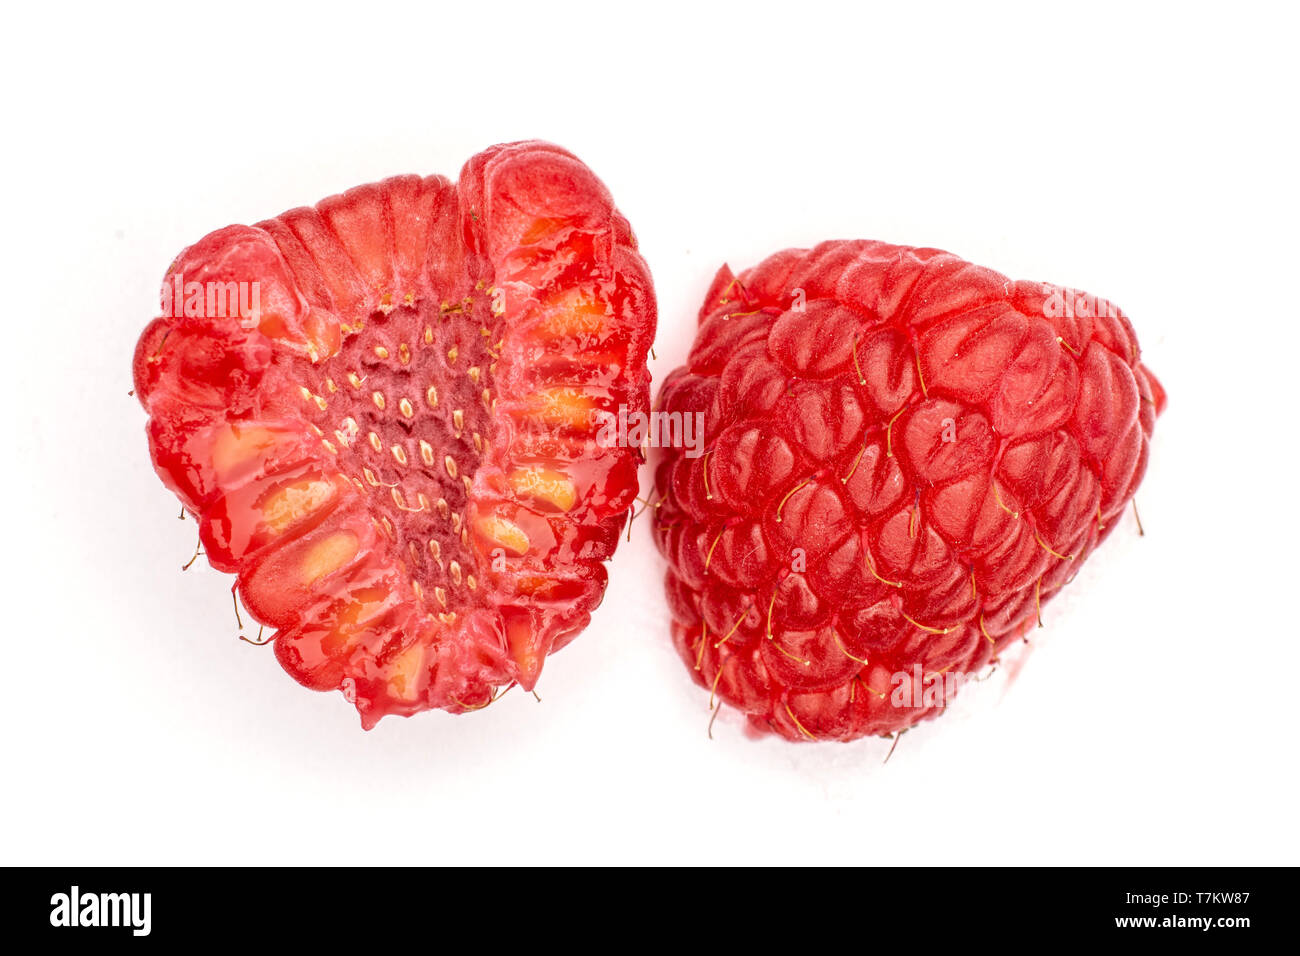 Group of one whole one half of fresh red raspberry cross section flatlay isolated on white background Stock Photo